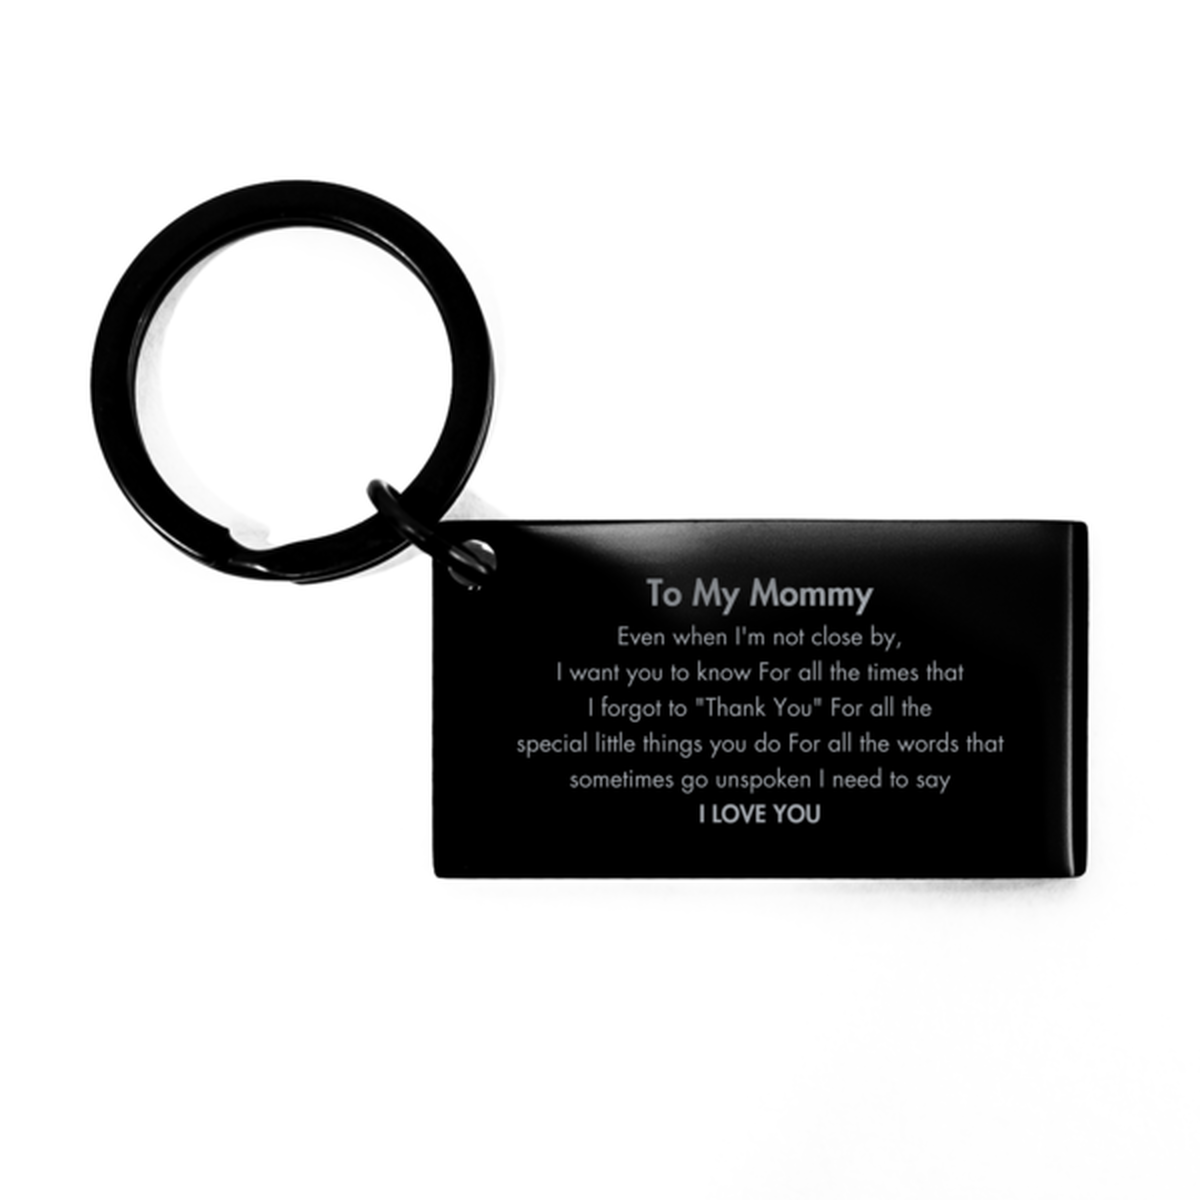 Thank You Gifts for Mommy, Keepsake Keychain Gifts for Mommy Birthday Mother's day Father's Day Mommy For all the words That sometimes go unspoken I need to say I LOVE YOU